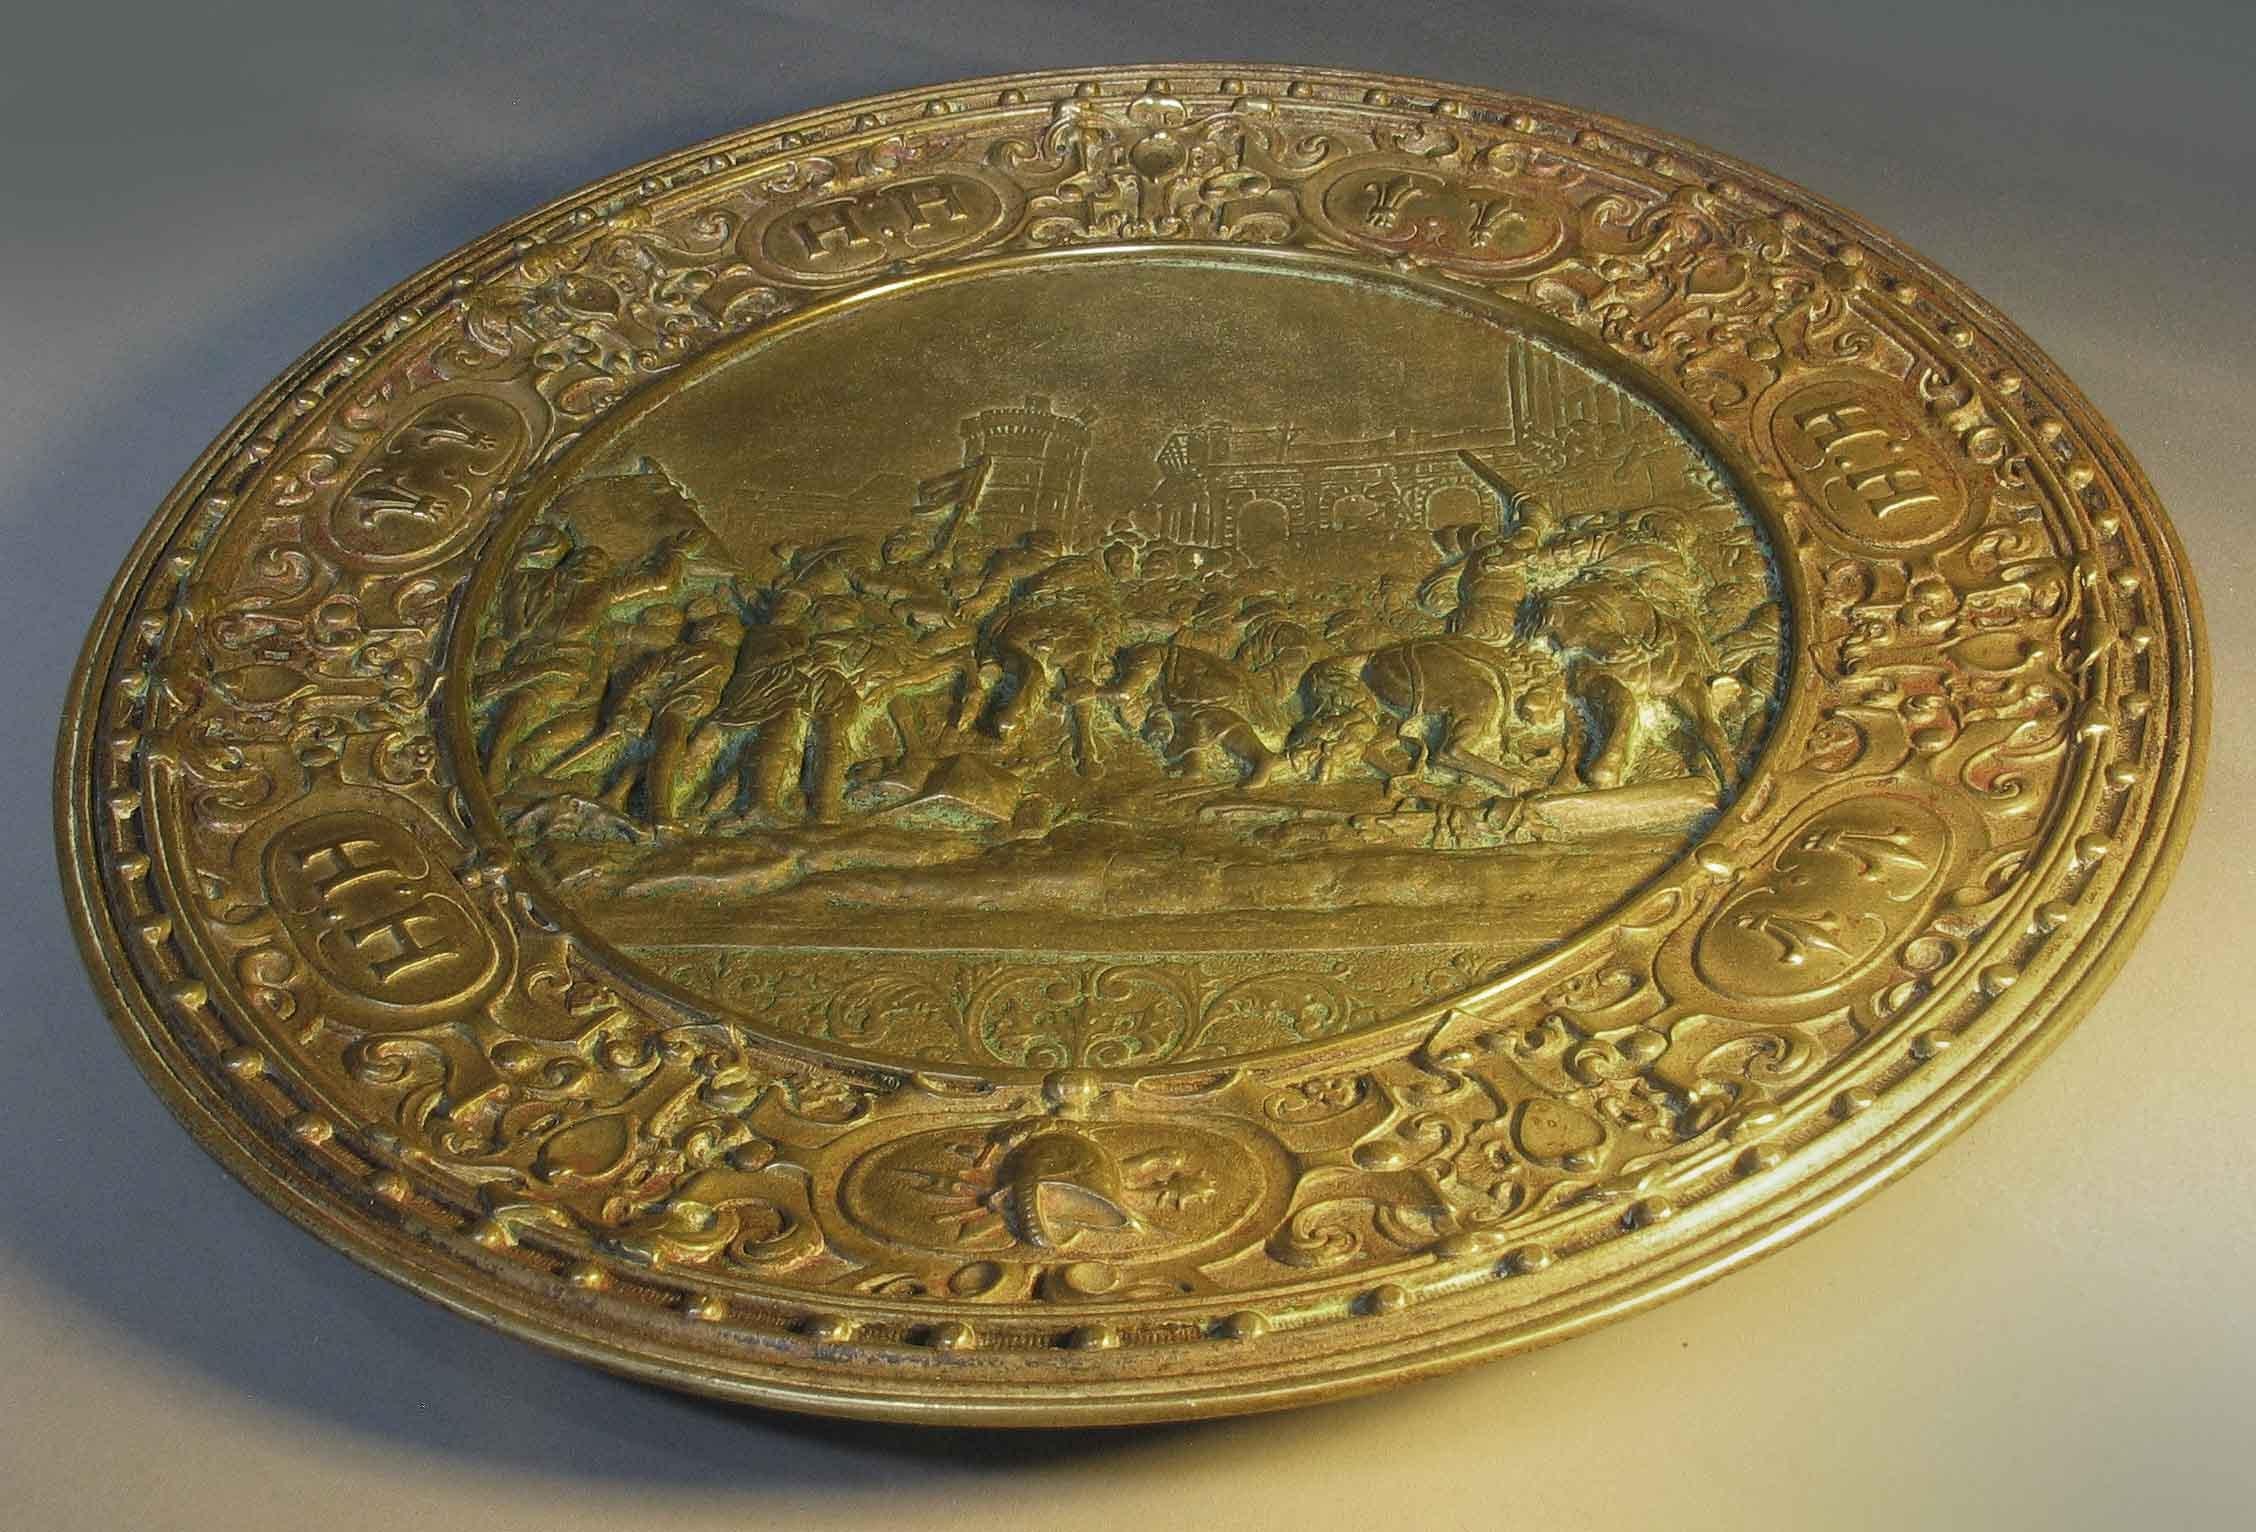 German Bronze Historicism Charger Depicting Entry of Henry IV into Paris in 1594 For Sale 1